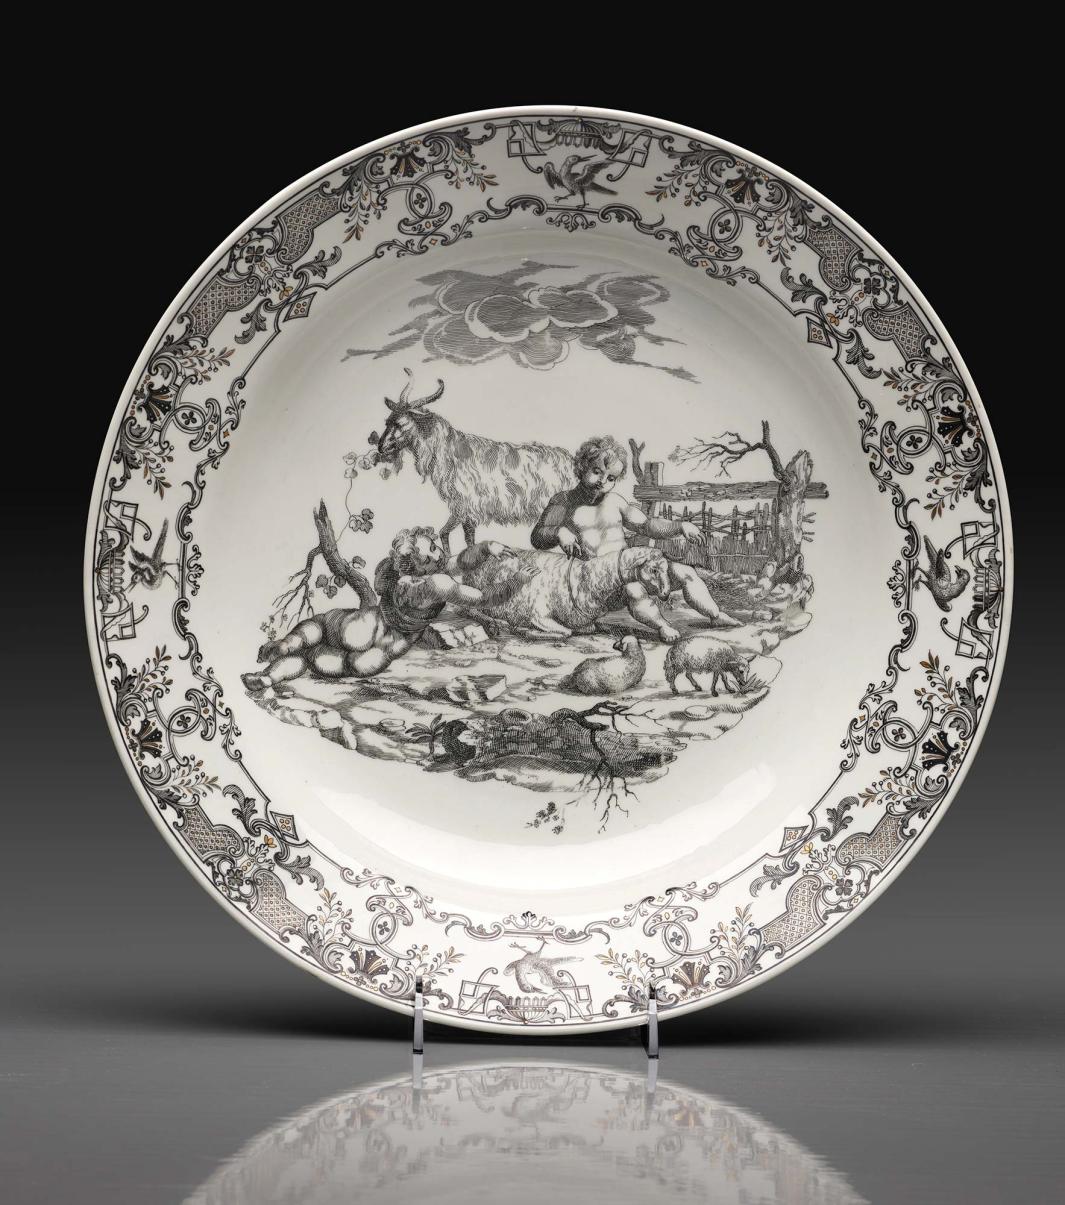 porcelain dish depicting scene of two nude youths or cherubs laying with sheep